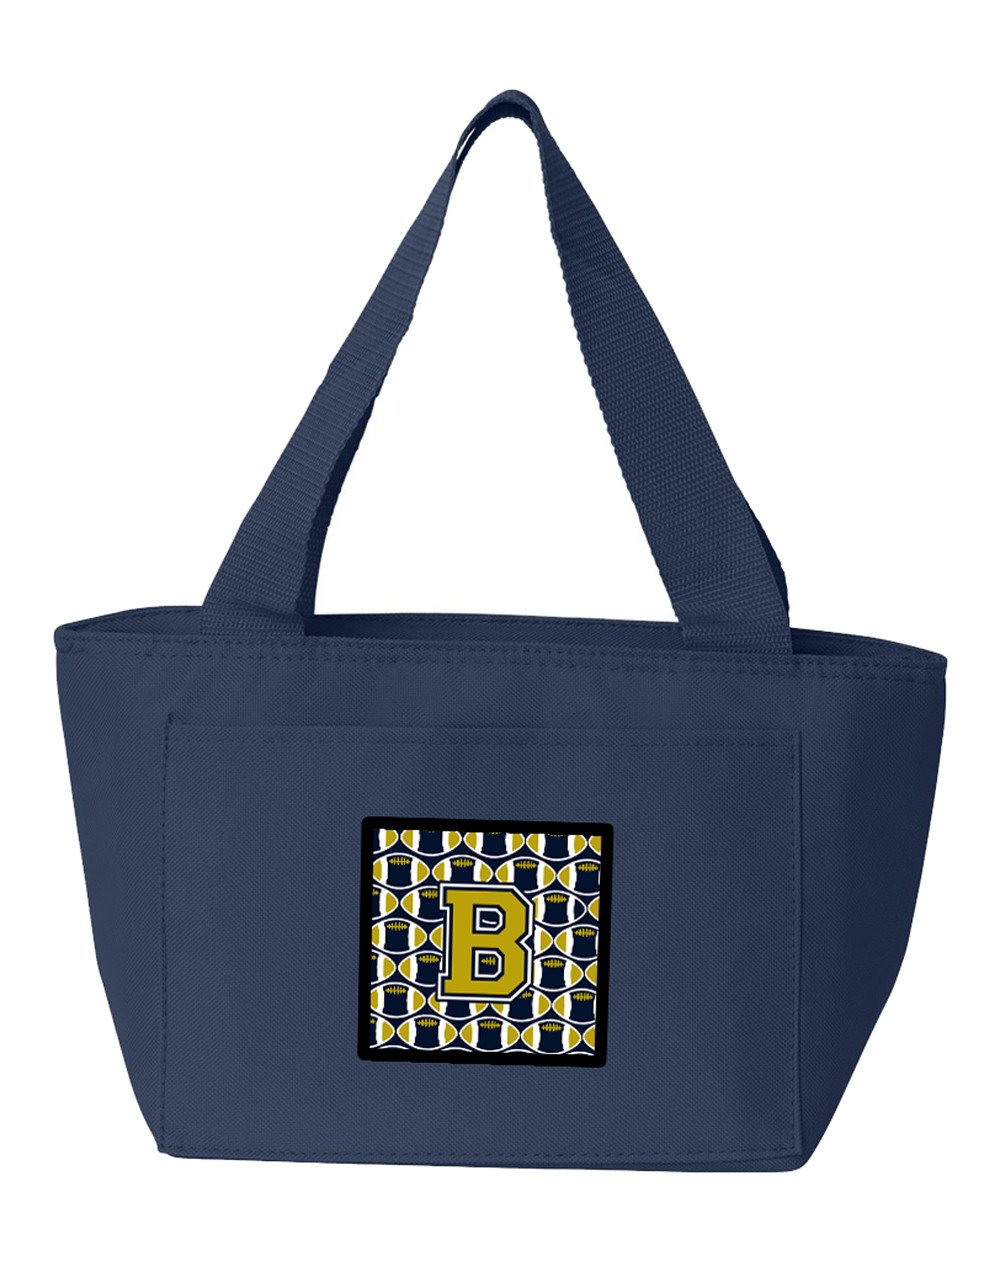 Letter B Football Blue and Gold Lunch Bag CJ1074-BNA-8808 by Caroline's Treasures